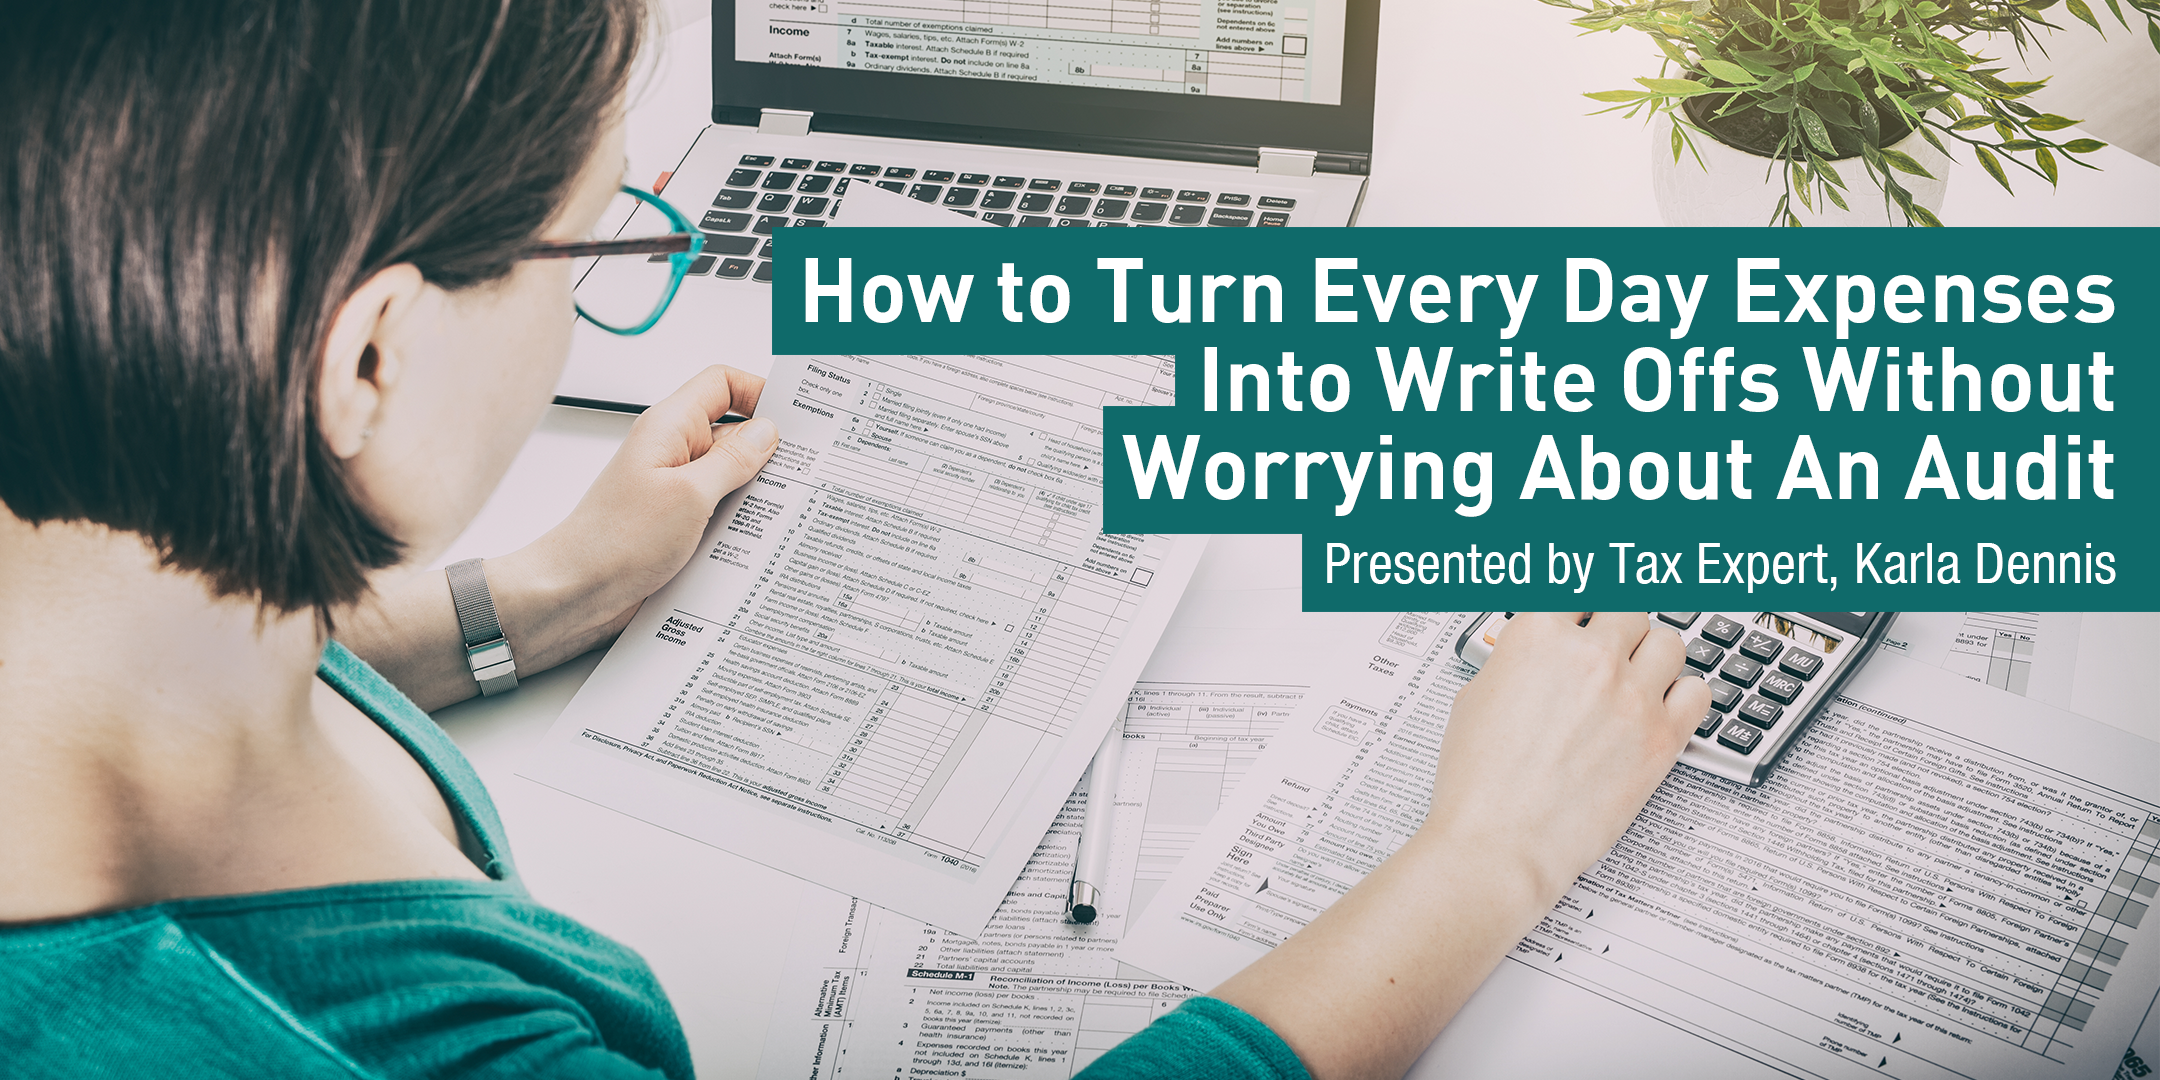 How to Turn Every Day Expenses Into Write Offs Without Worrying About An Audit (VN)